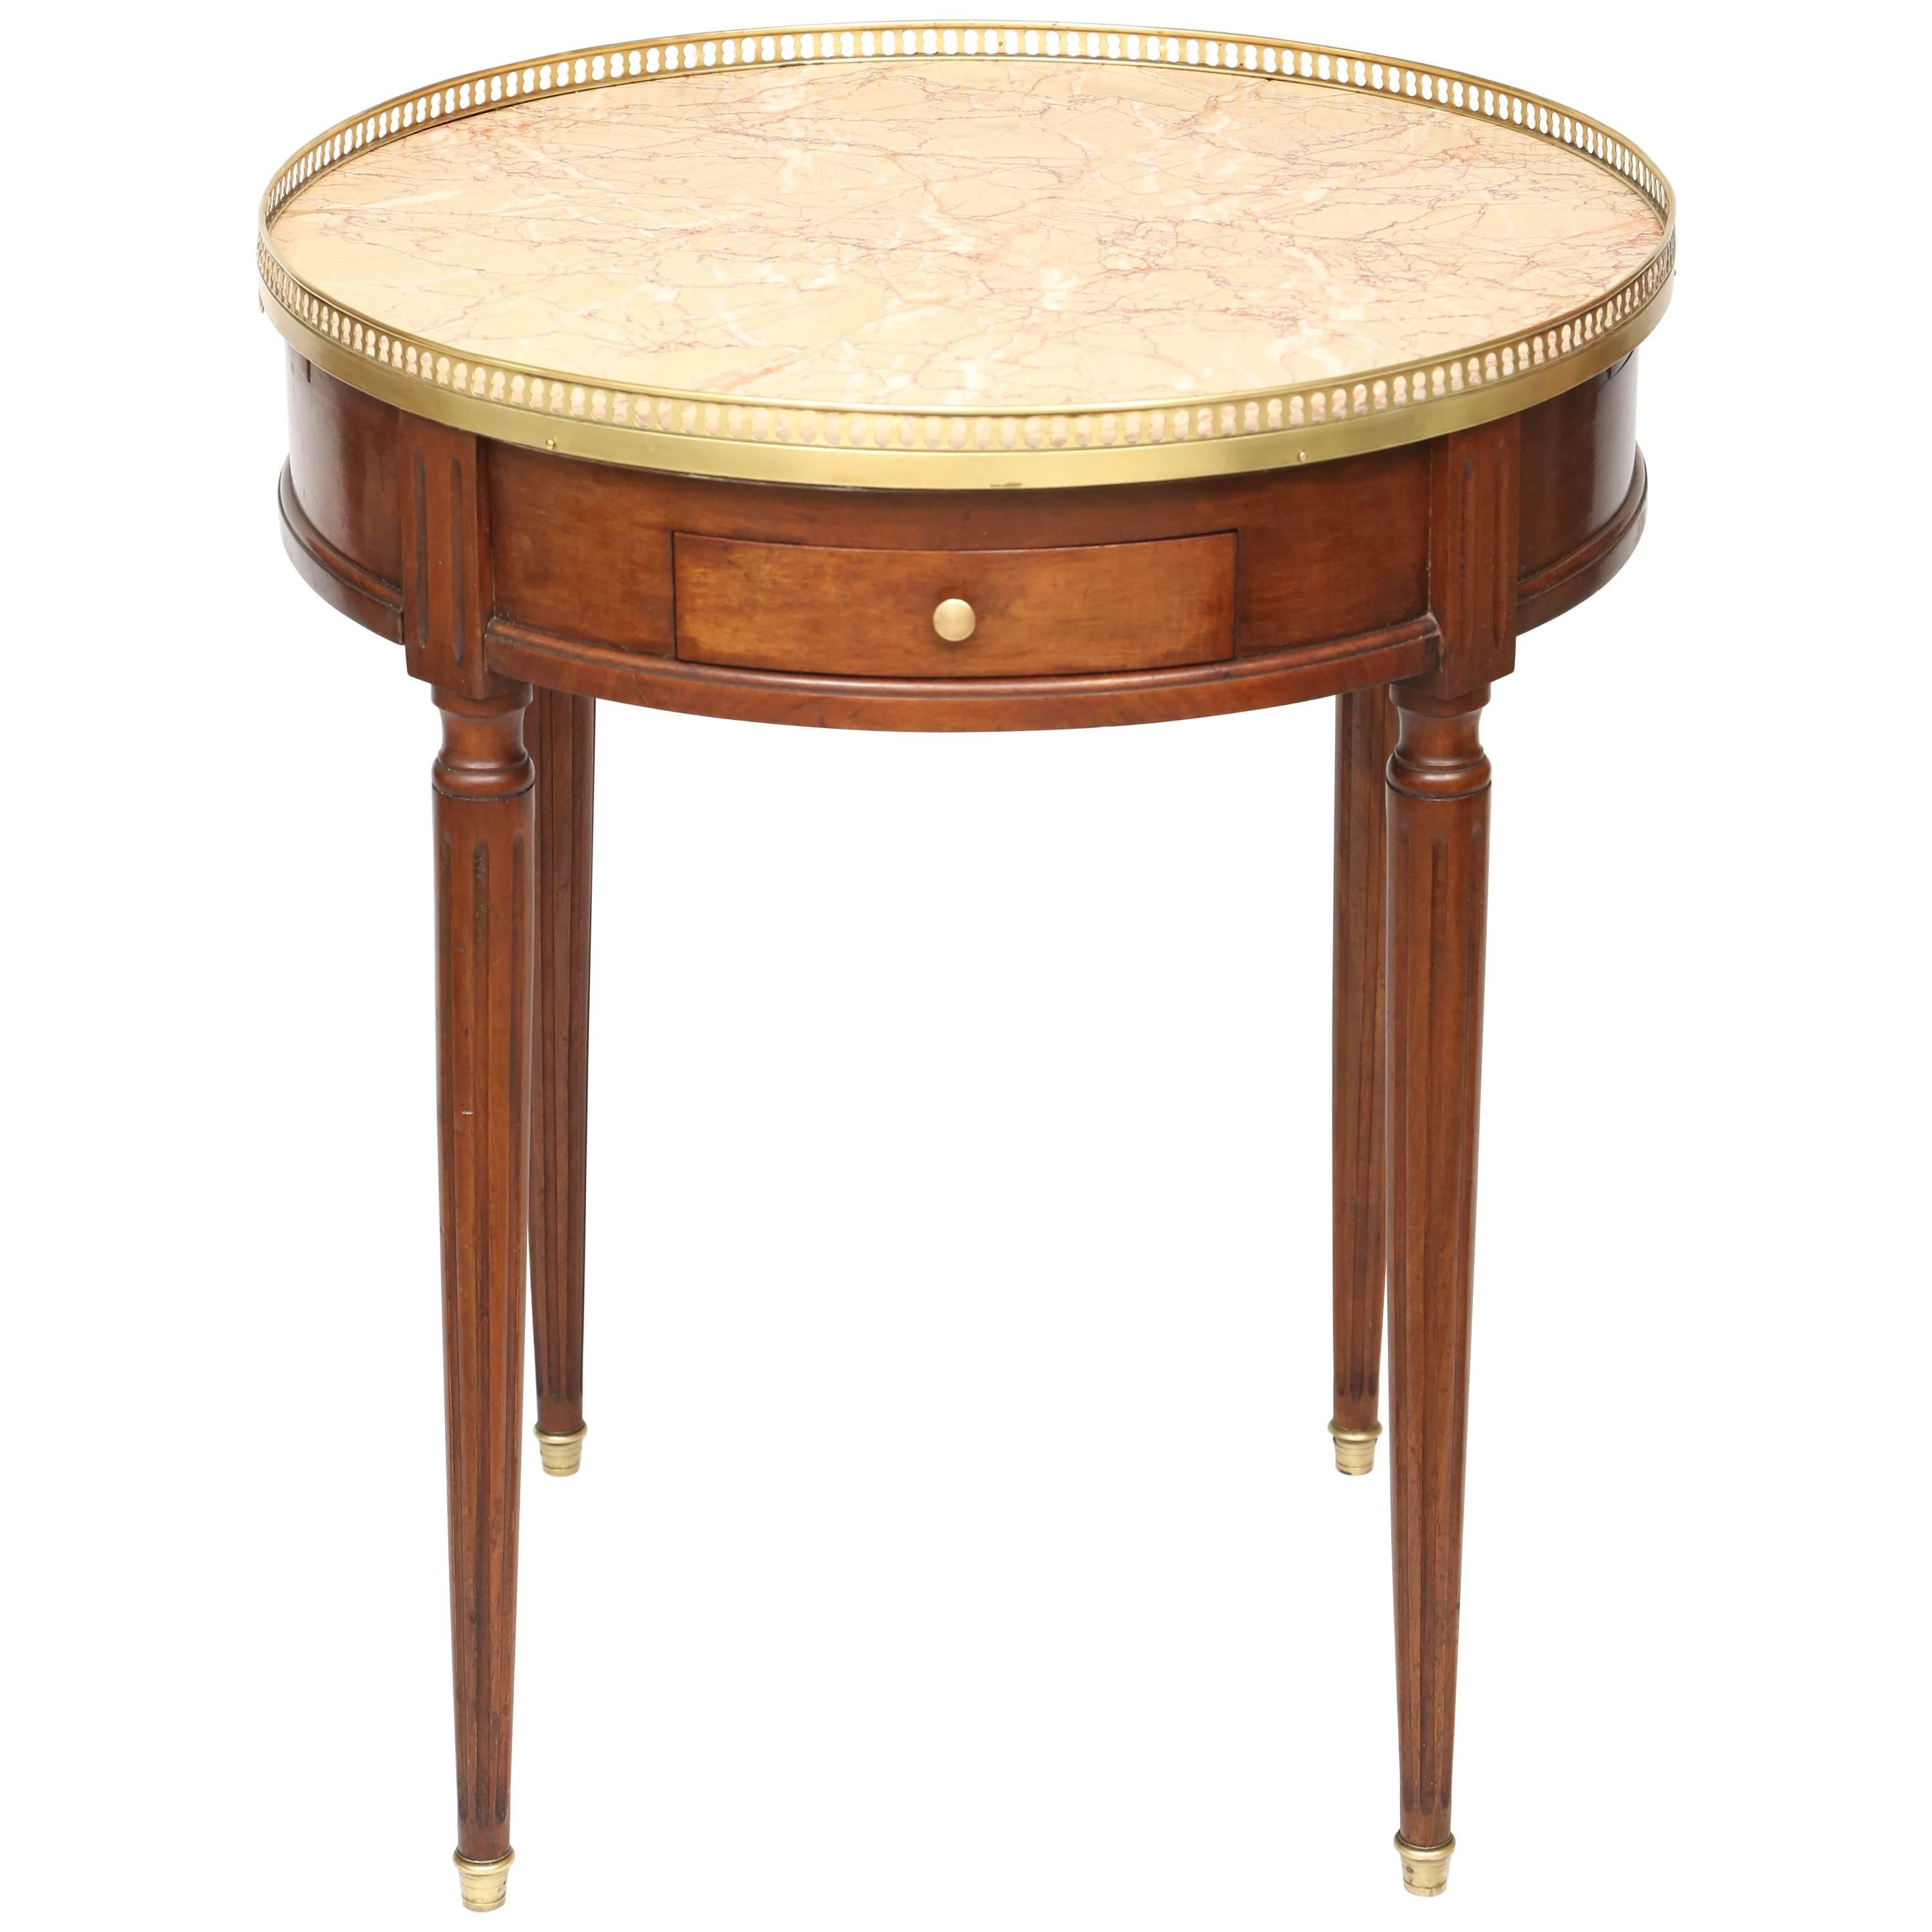 19th Century Mahogany Bouillotte Table with Marble Top